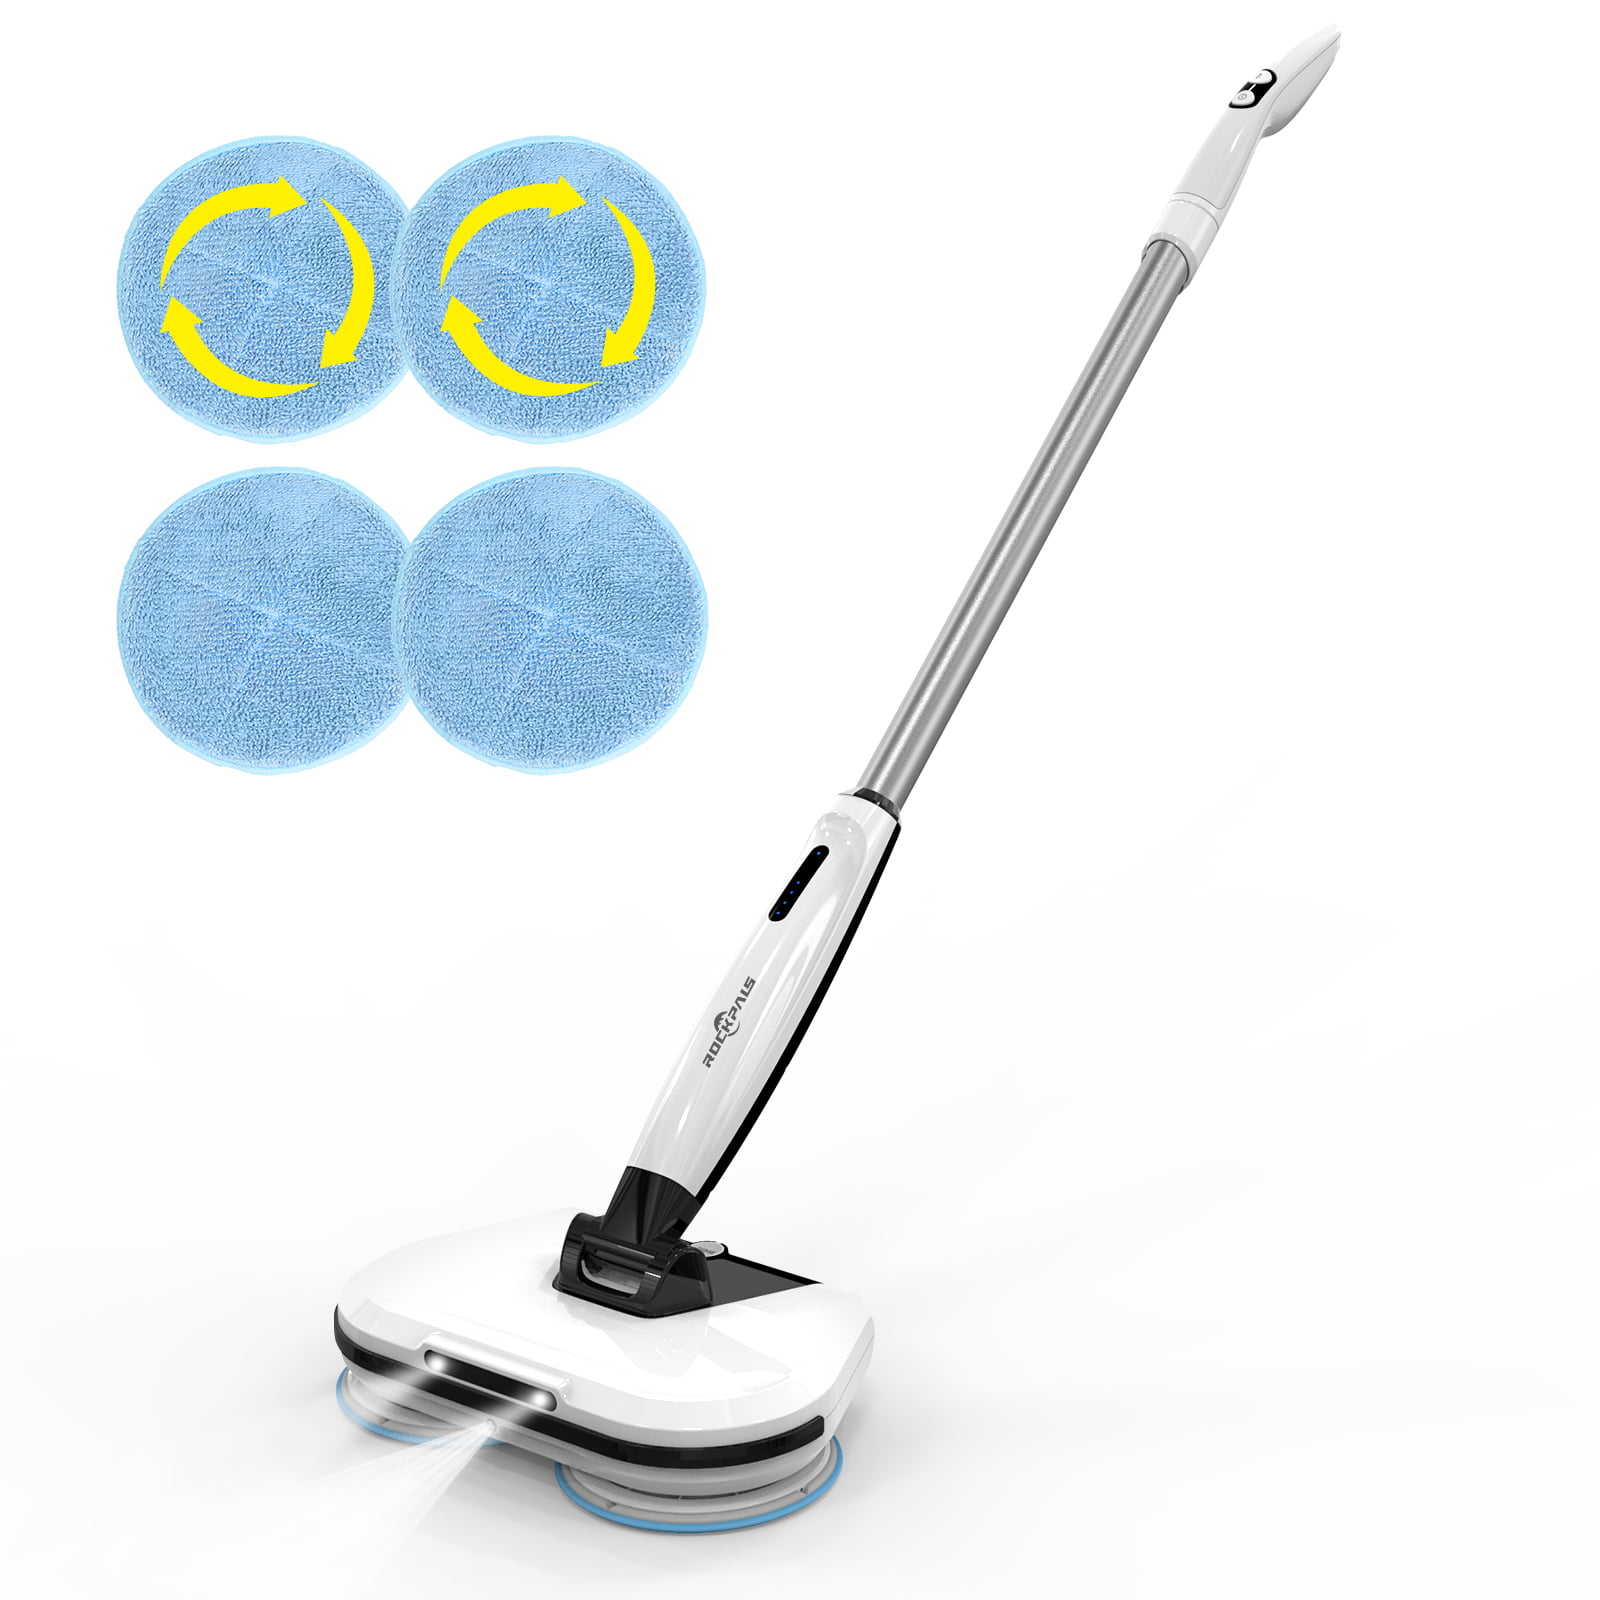 Rockpals Electric Spin Mop, Cordless Handheld Floor Cleaner with